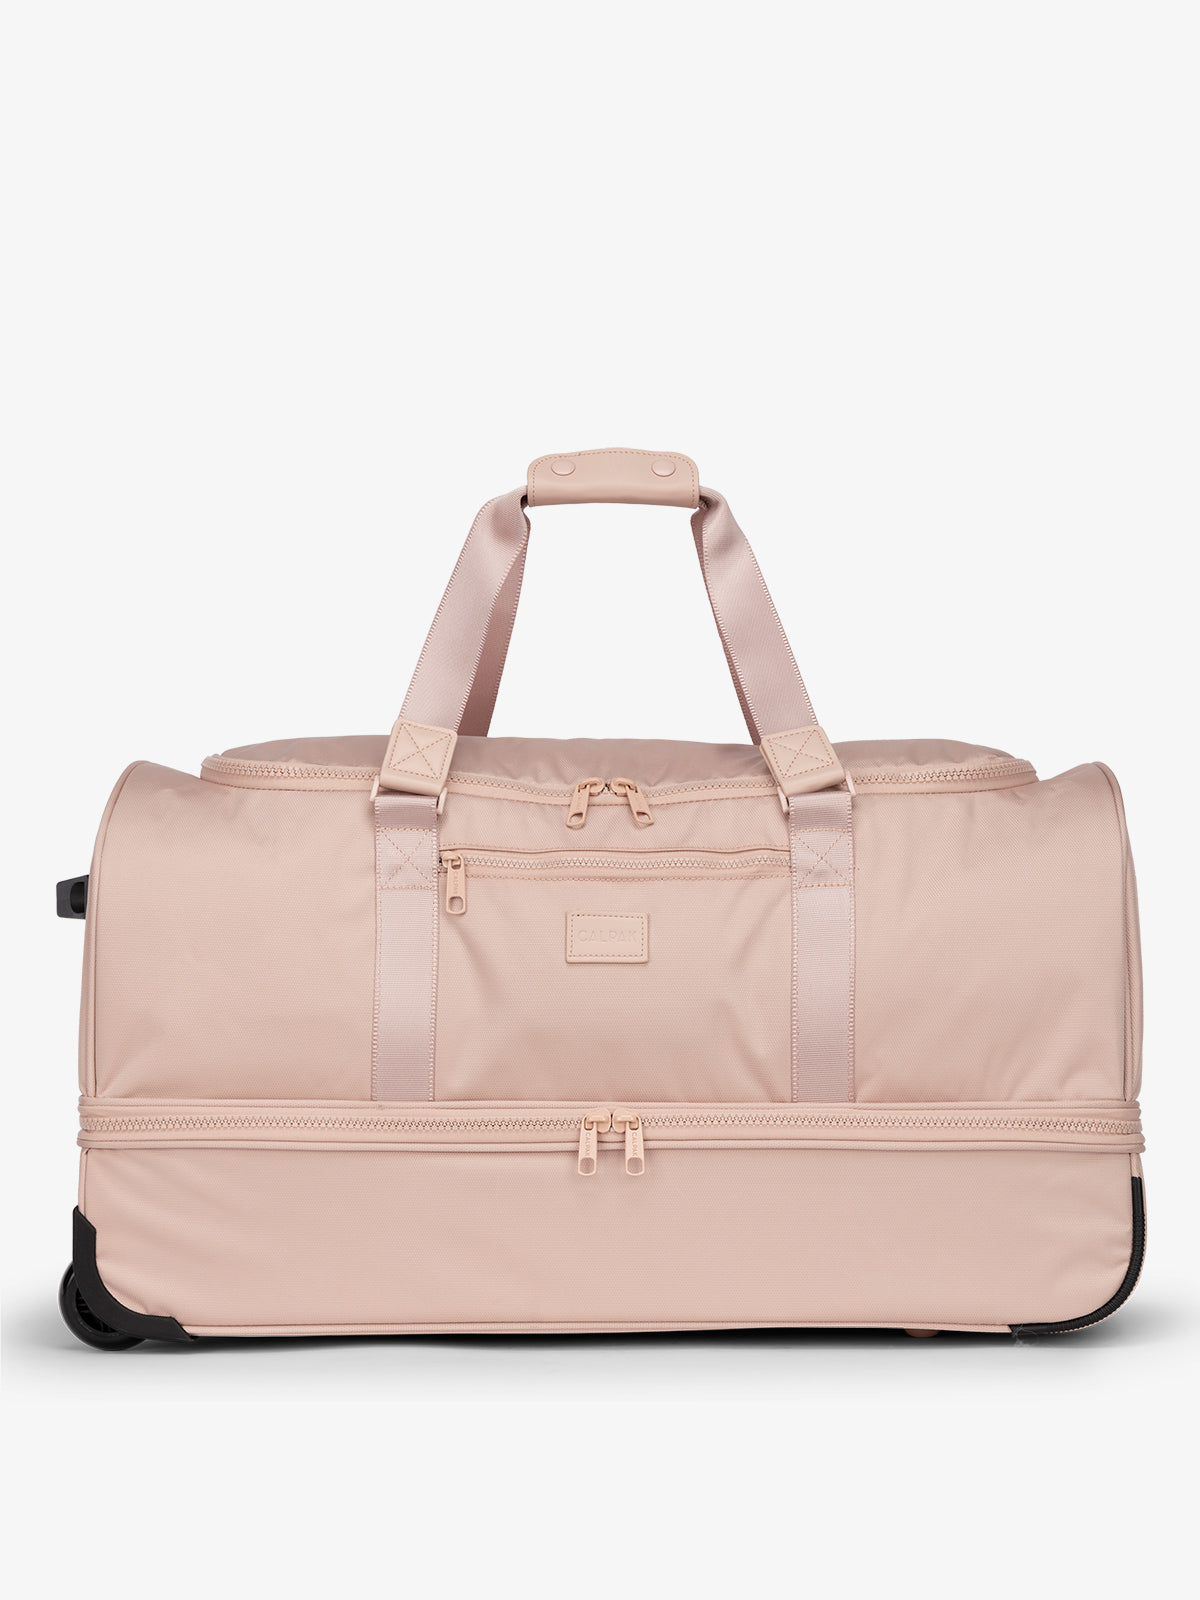 CALPAK Stevyn Large Rolling Duffel with wheels, dual handles, zipper enclosed compartments, and shoe compartment in light pink